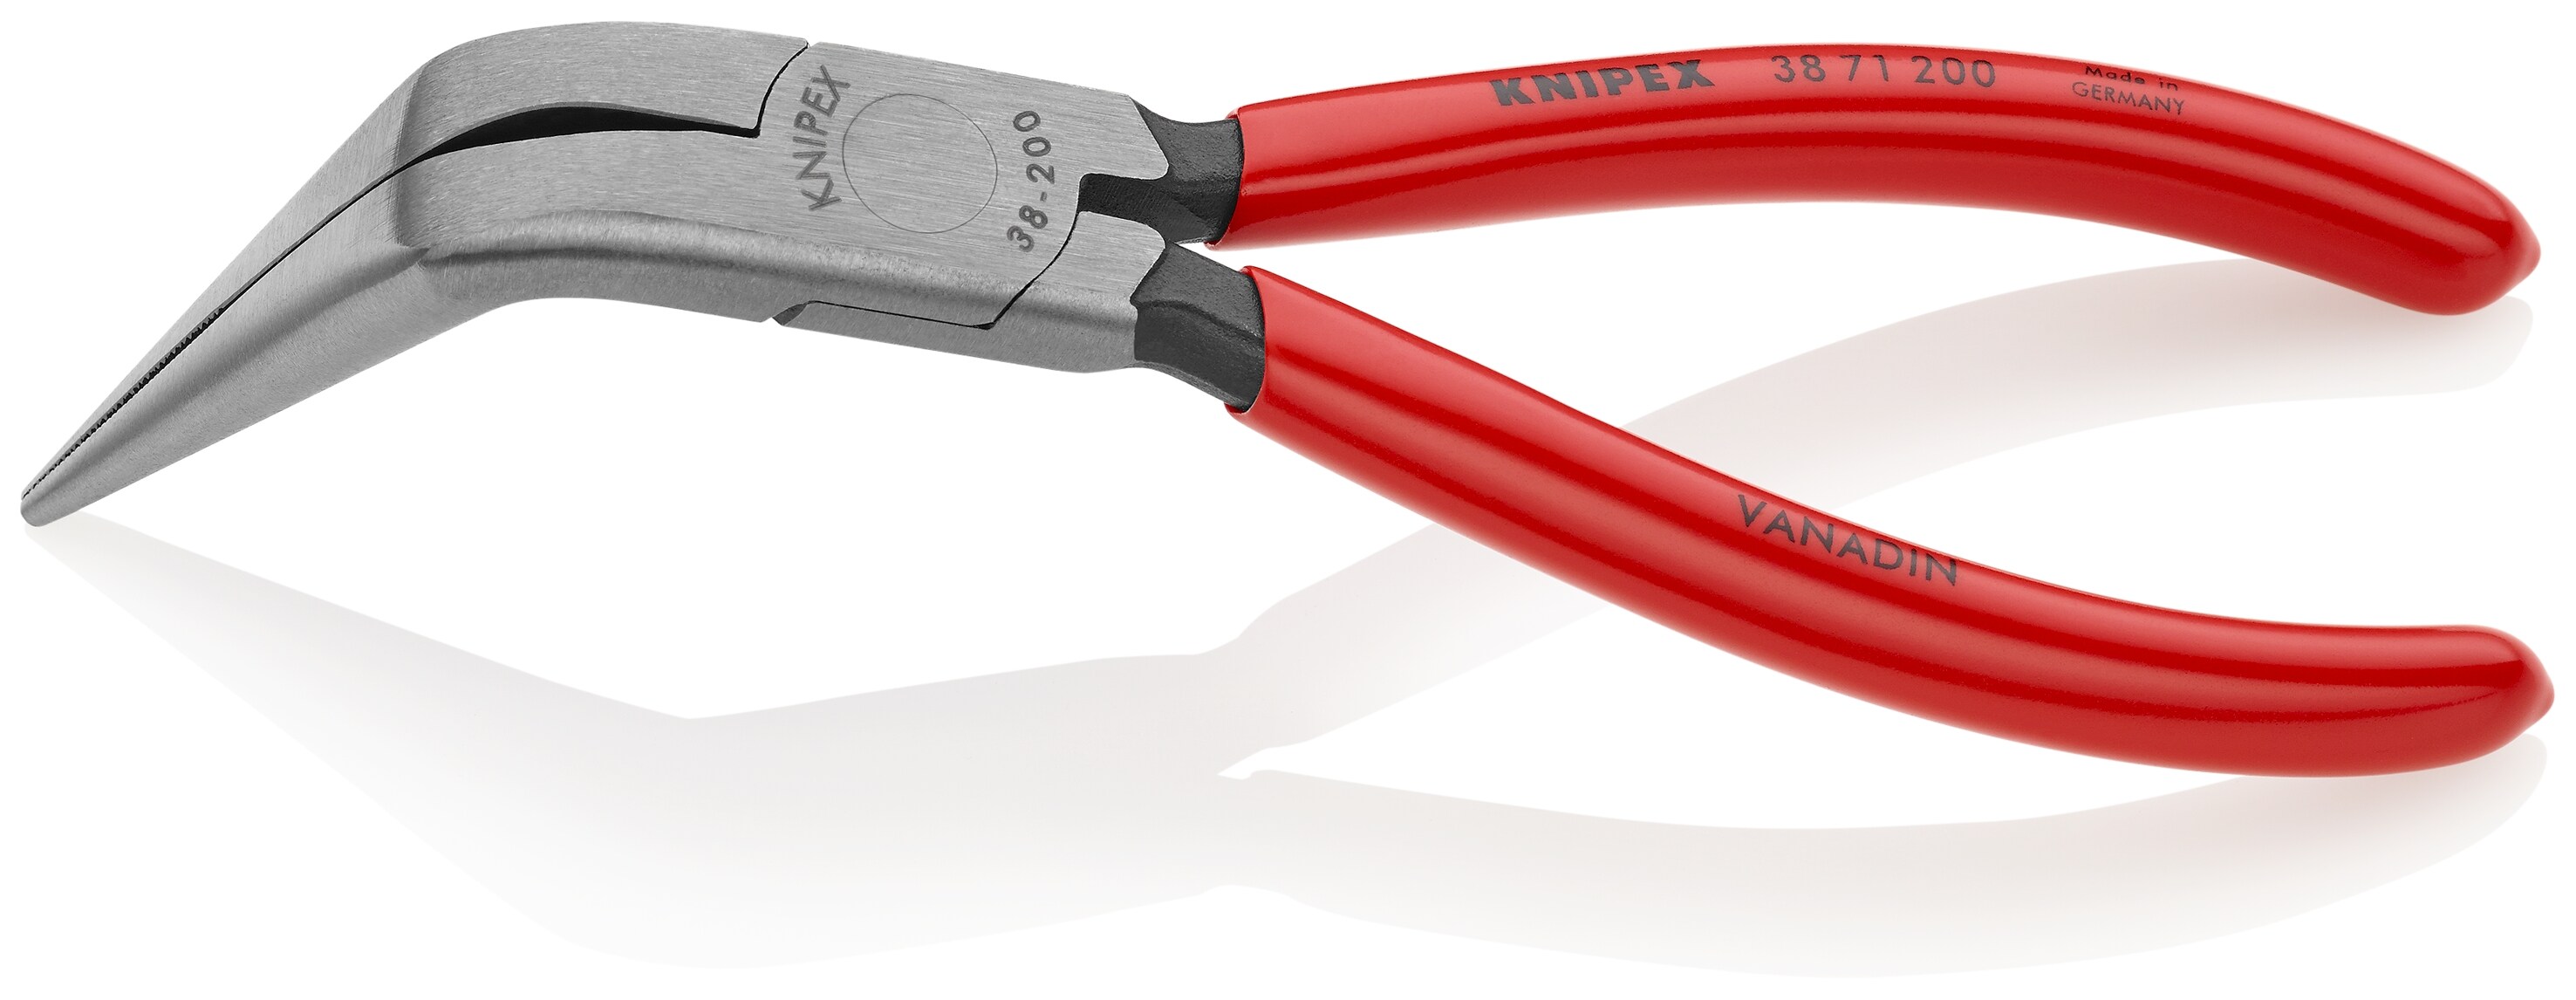 Knipex 6.3 Needle-Nose 45 Degree Bent Pliers (Gripping Pliers) - MultiGrip